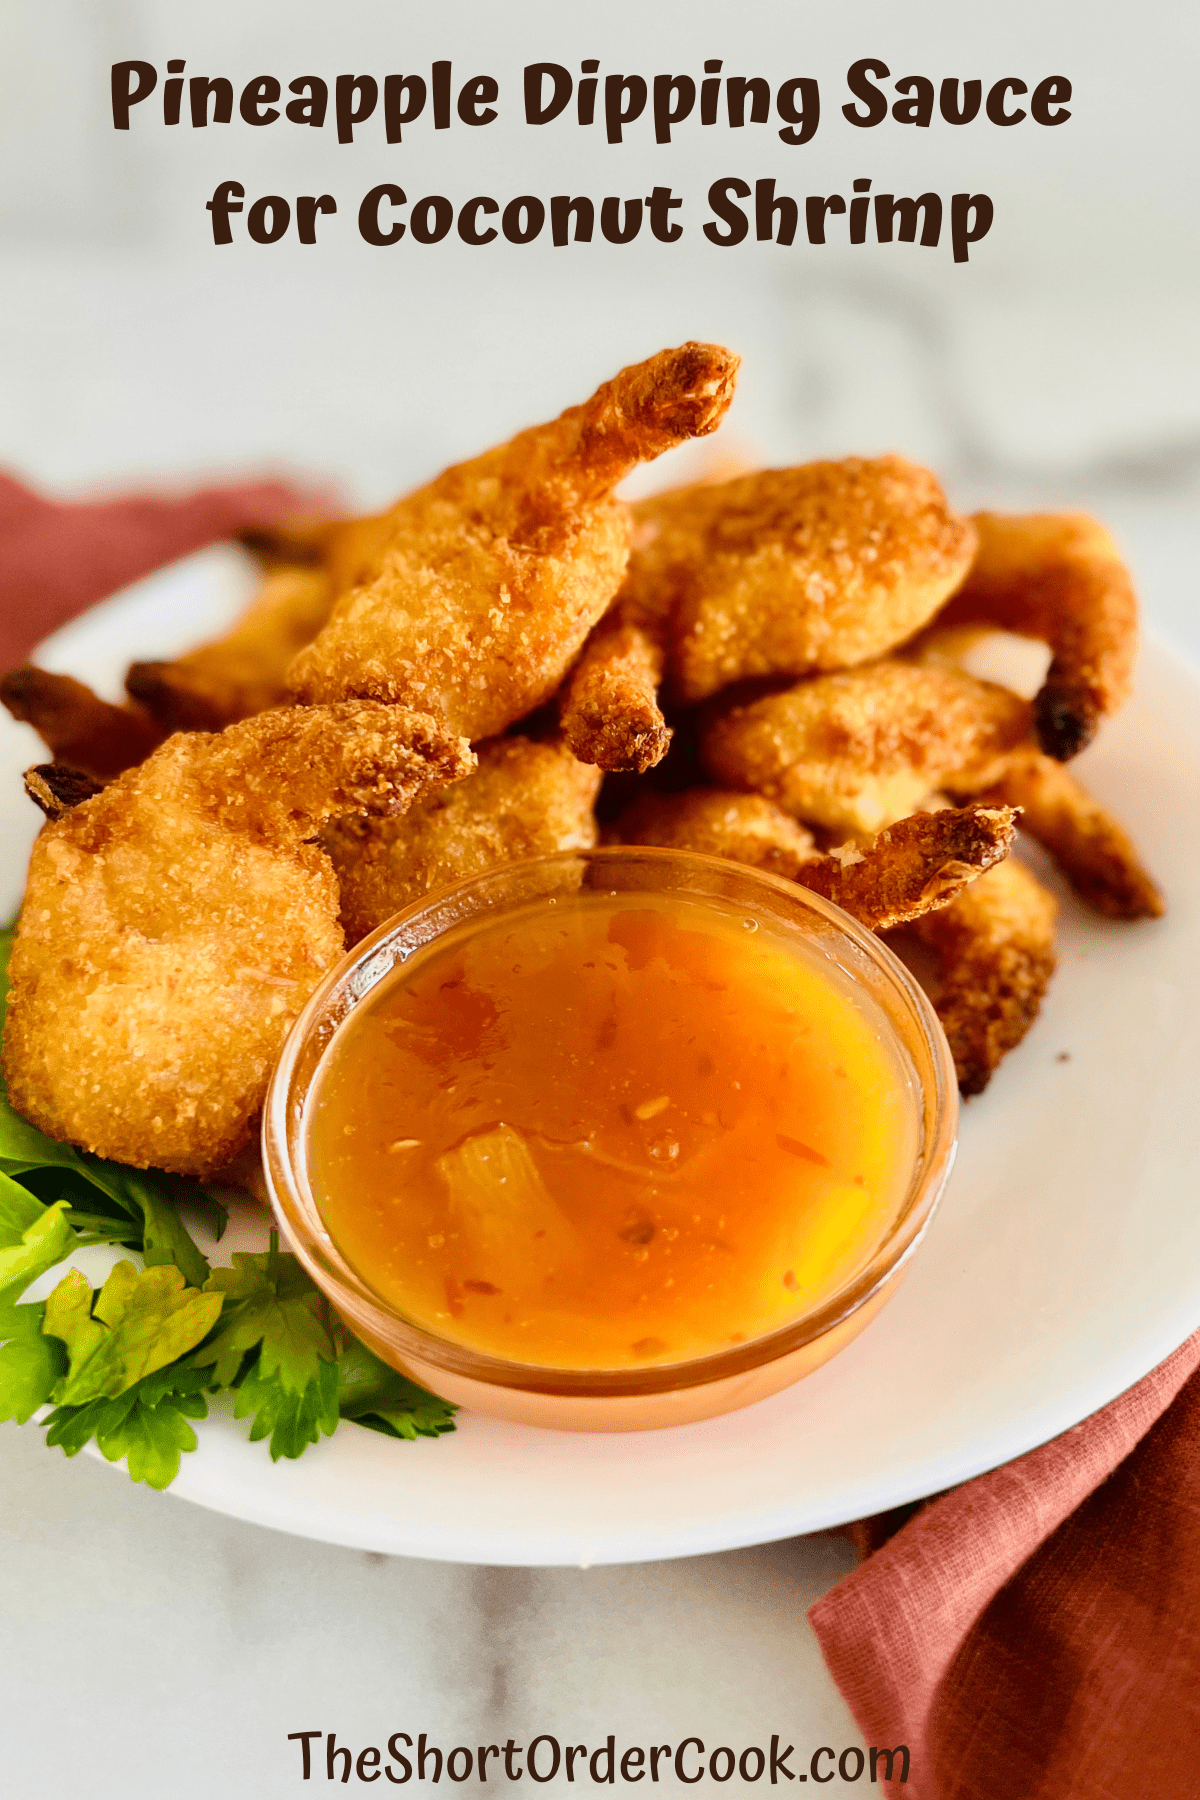 A plate of coconut shrimp with pineapple dipping sauce.